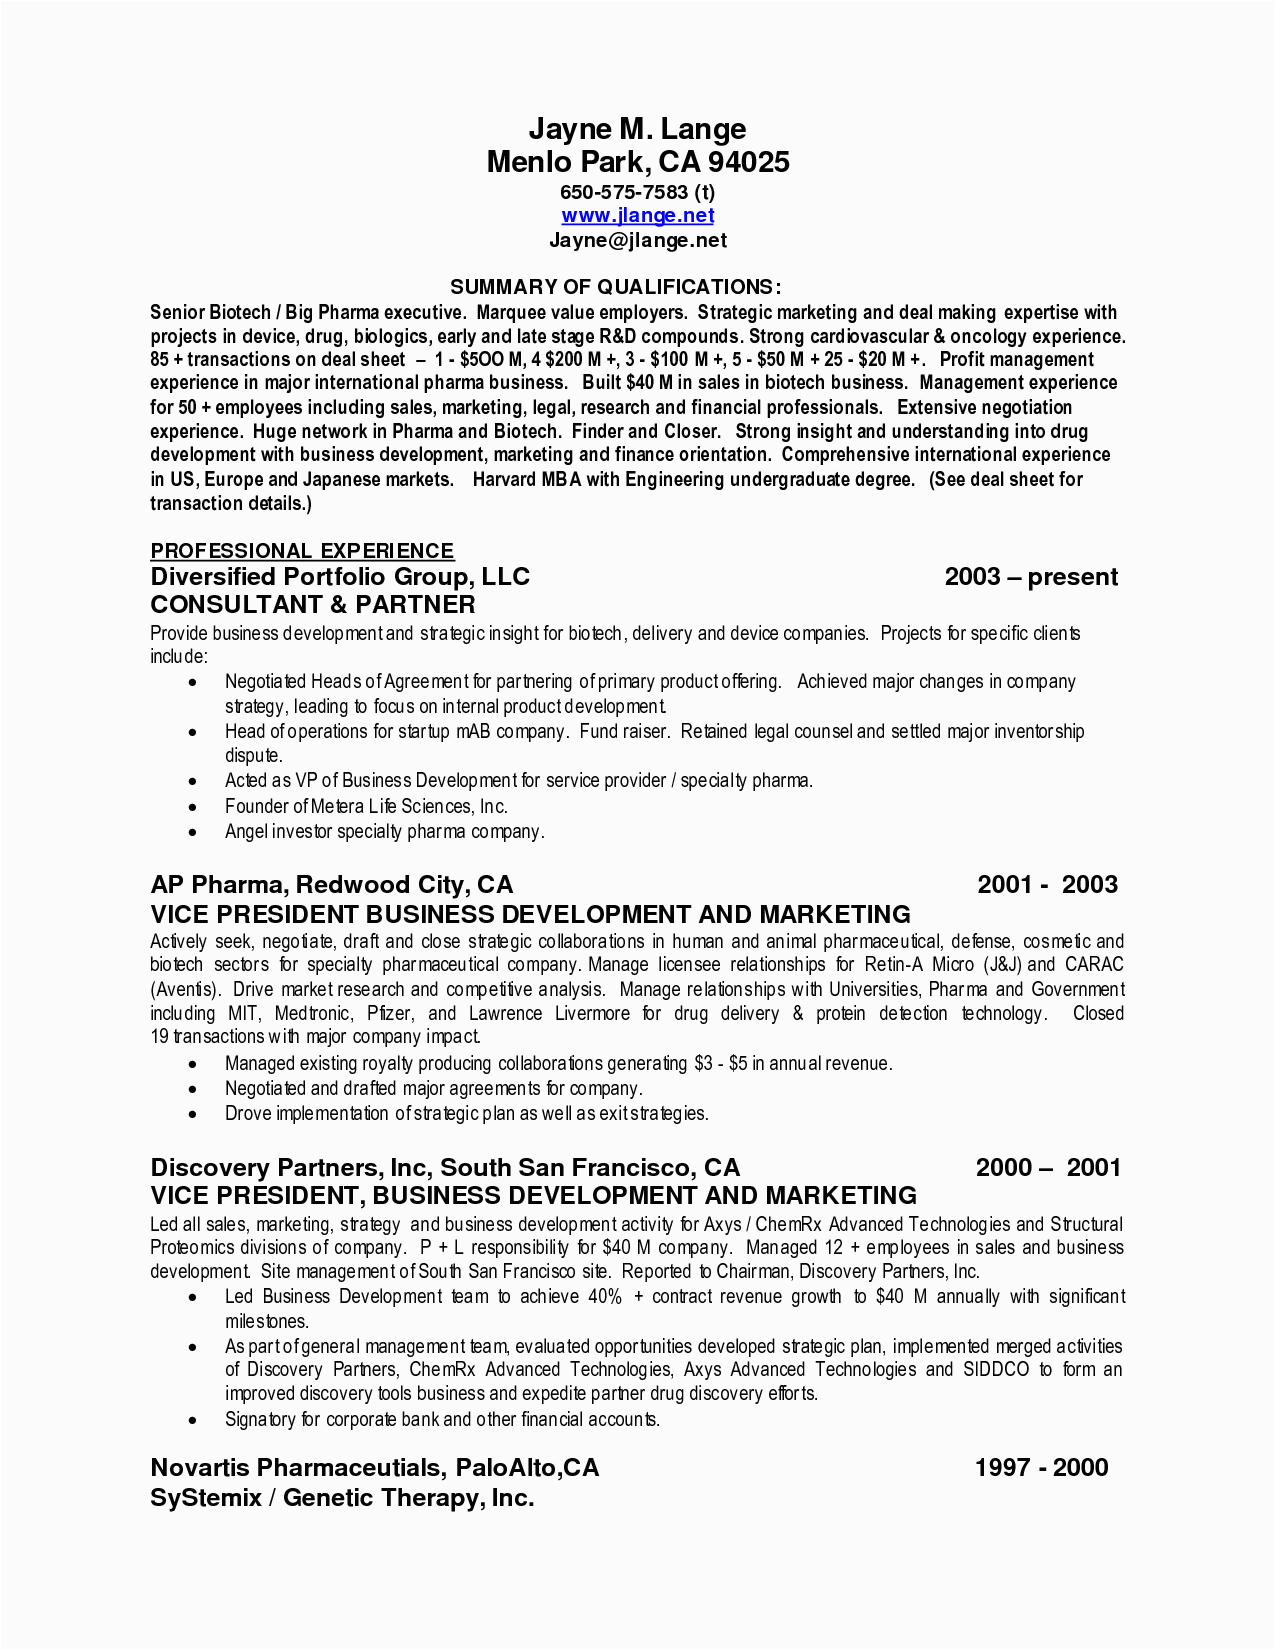 Executive assistant Summary Of Qualifications Sample Resume Best Summary Of Qualifications Resume for 2016